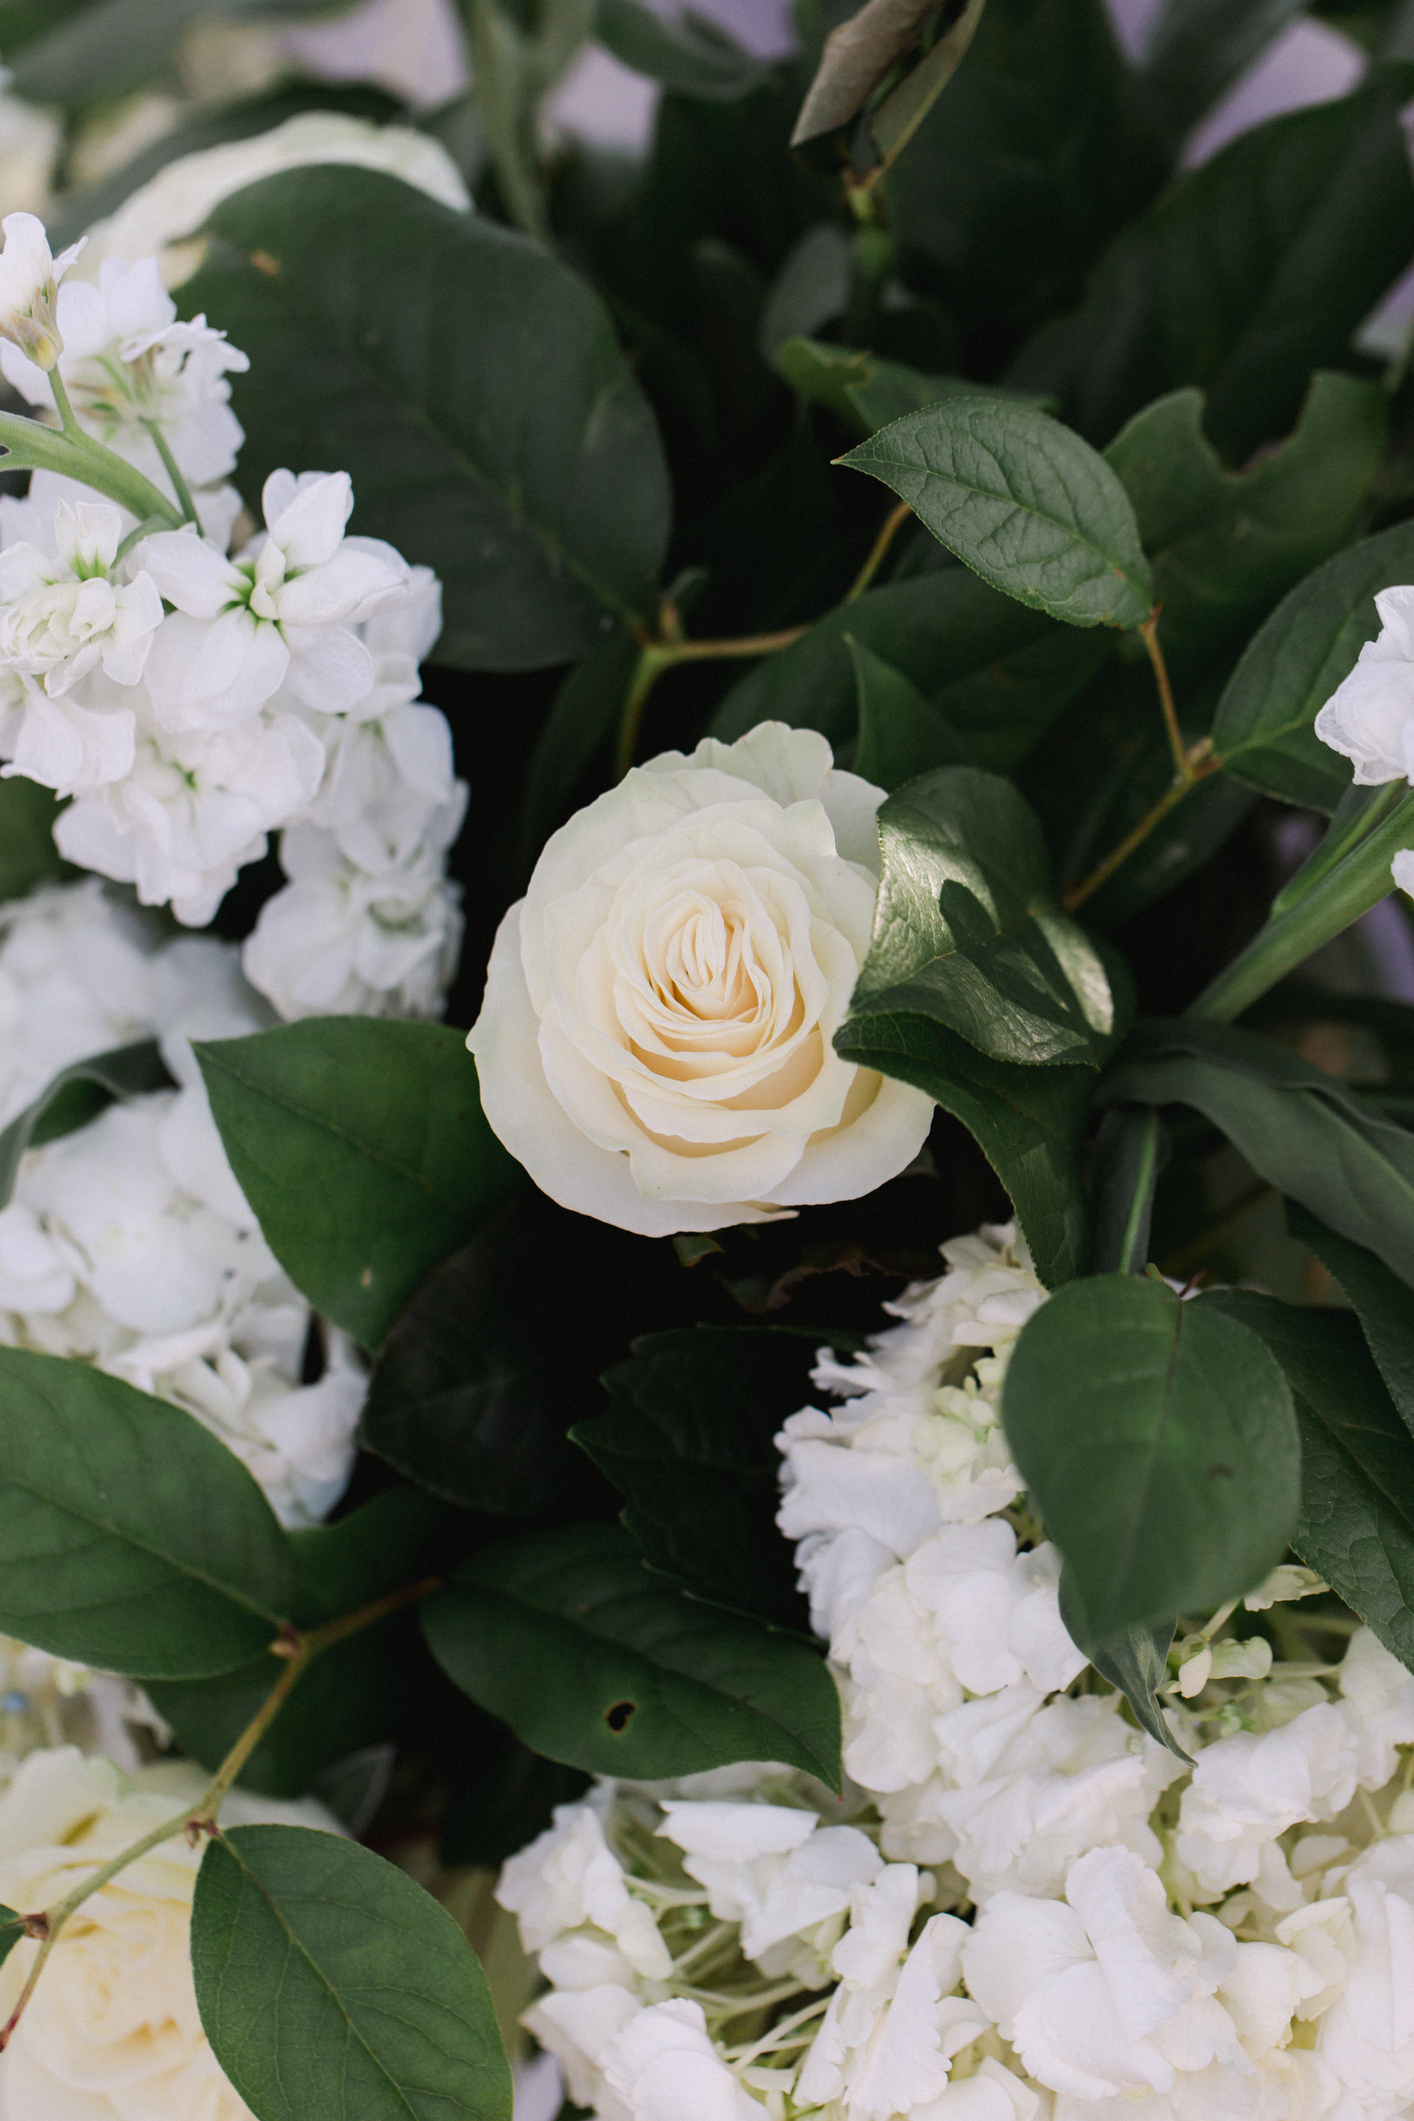 Garden Wedding Details of White Roses and green leaves close up